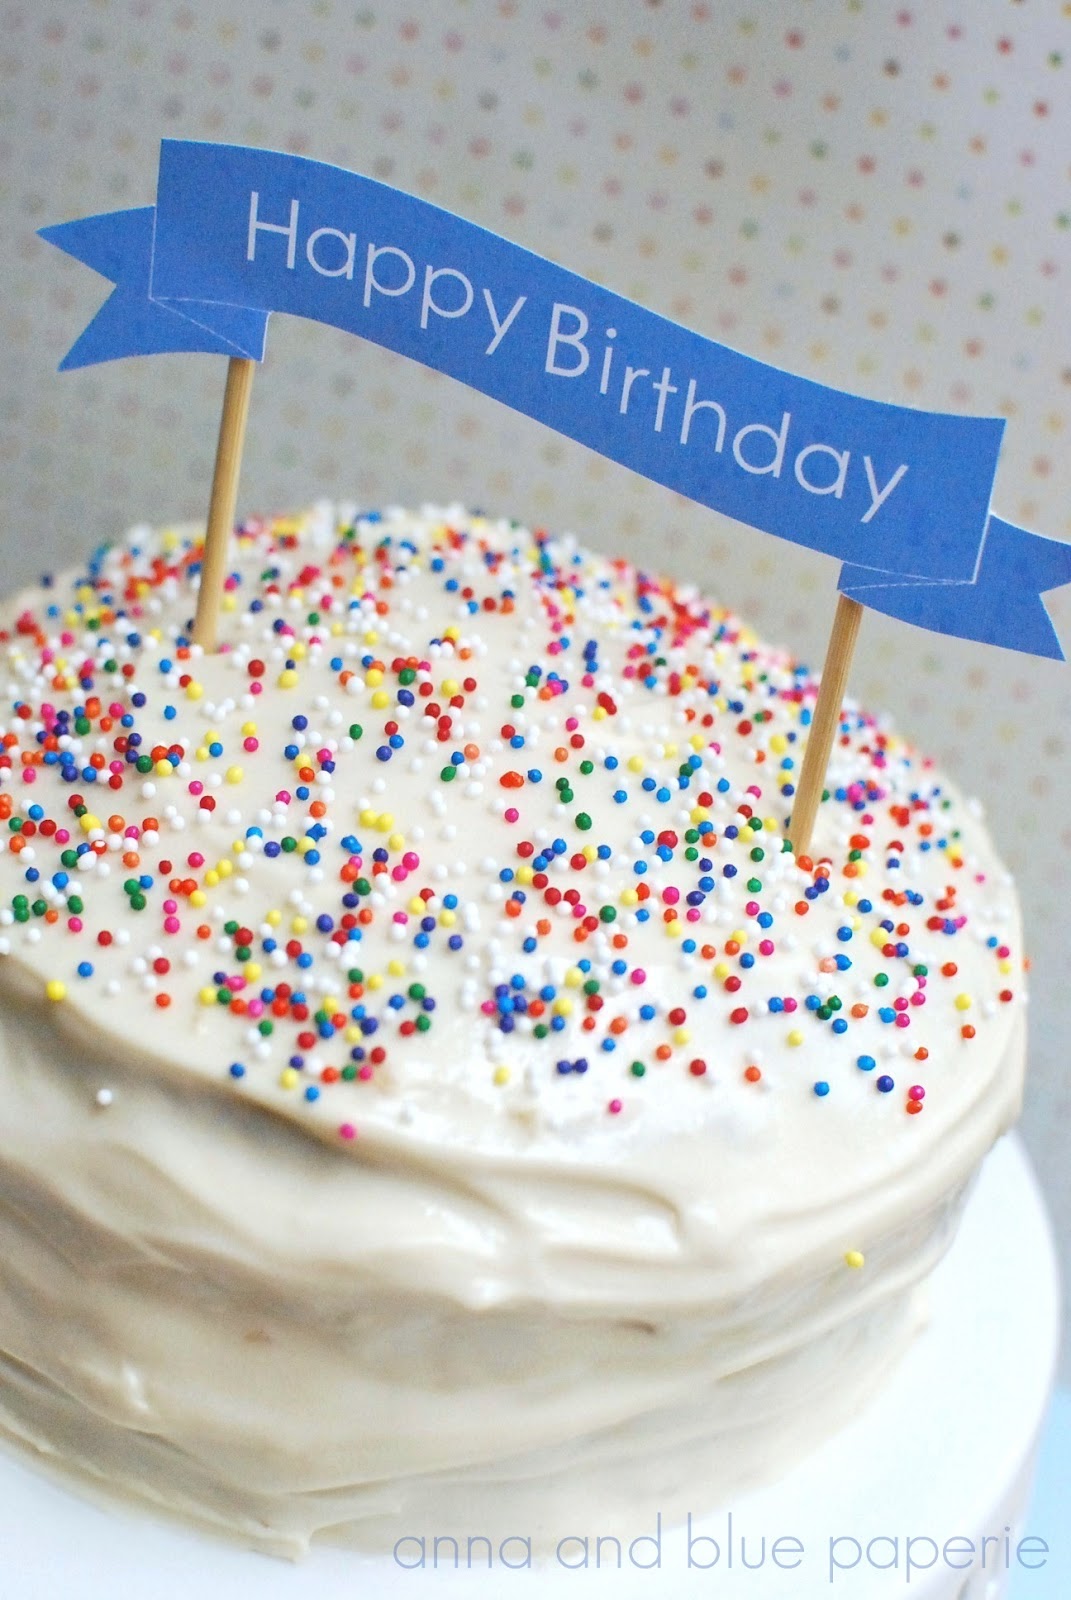 anna-and-blue-paperie-free-printable-happy-birthday-cake-banners